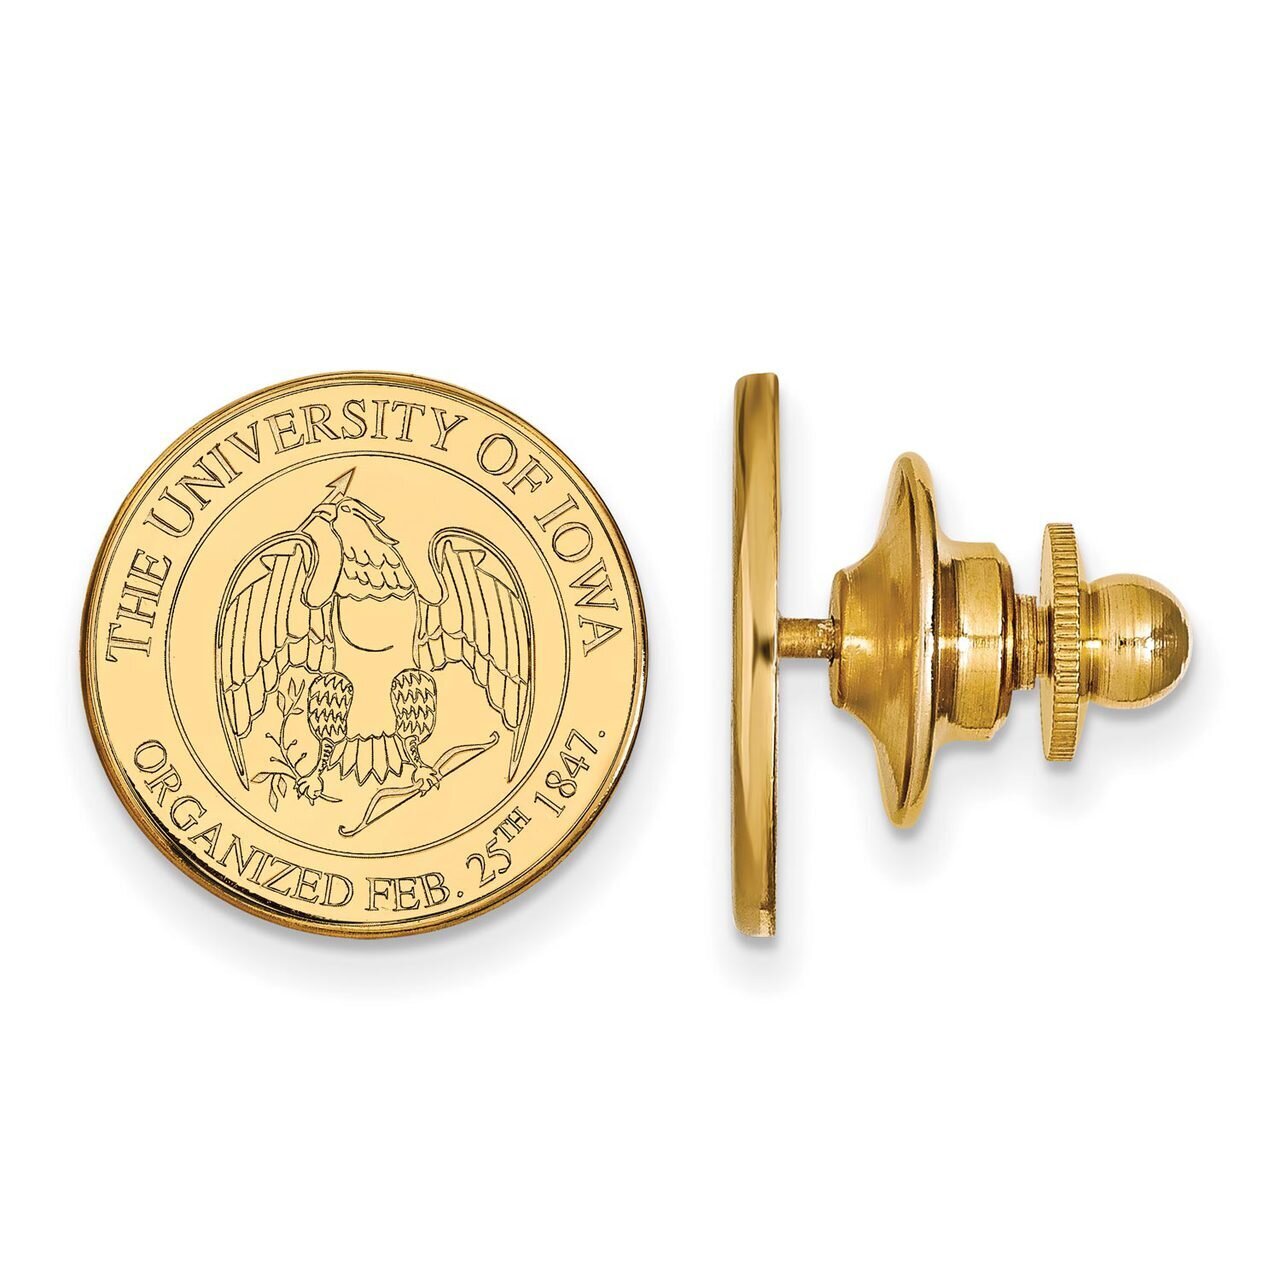 University of Iowa Crest Lapel Pin Gold-plated Silver GP080UIA